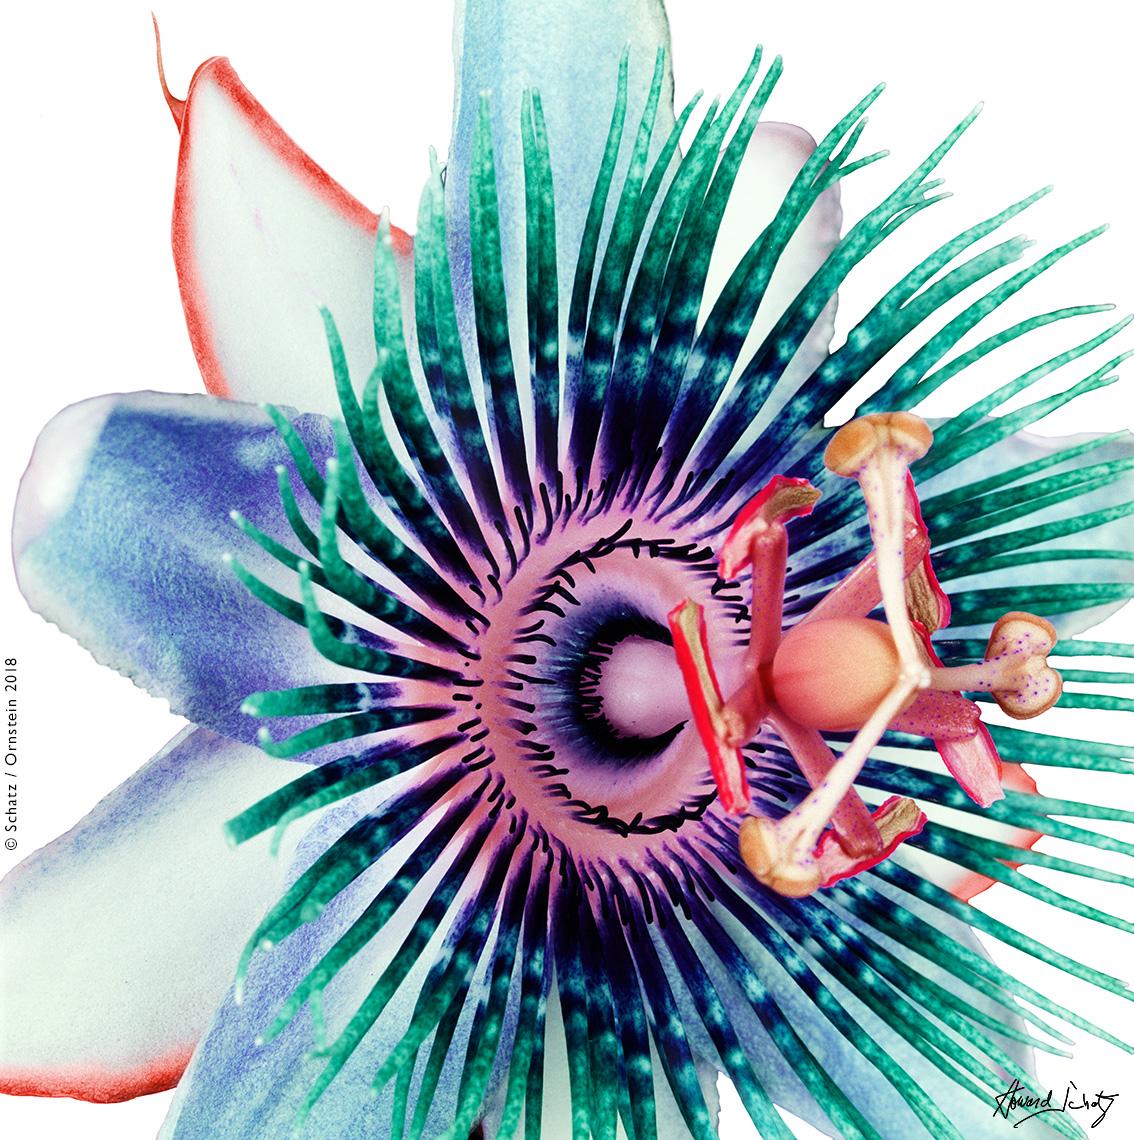 Passion Flower #1, from the Botanica Series